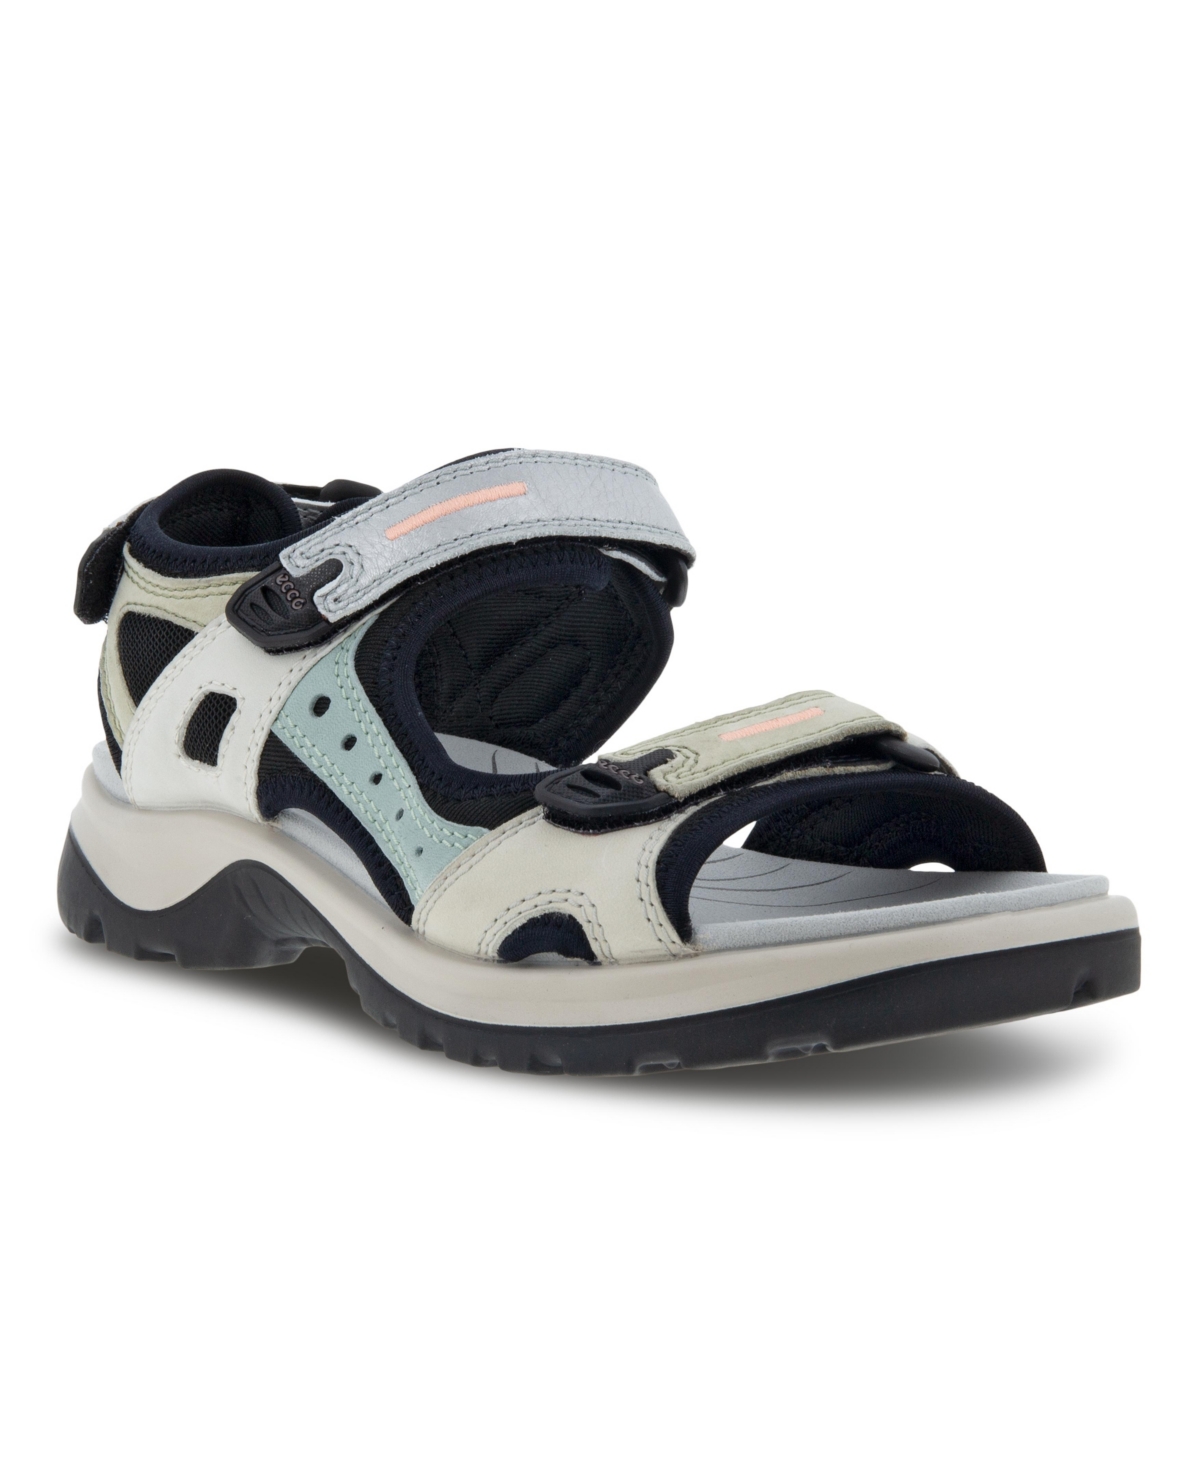 UPC 194891064279 product image for Ecco Women's Offroad Sandals Women's Shoes | upcitemdb.com